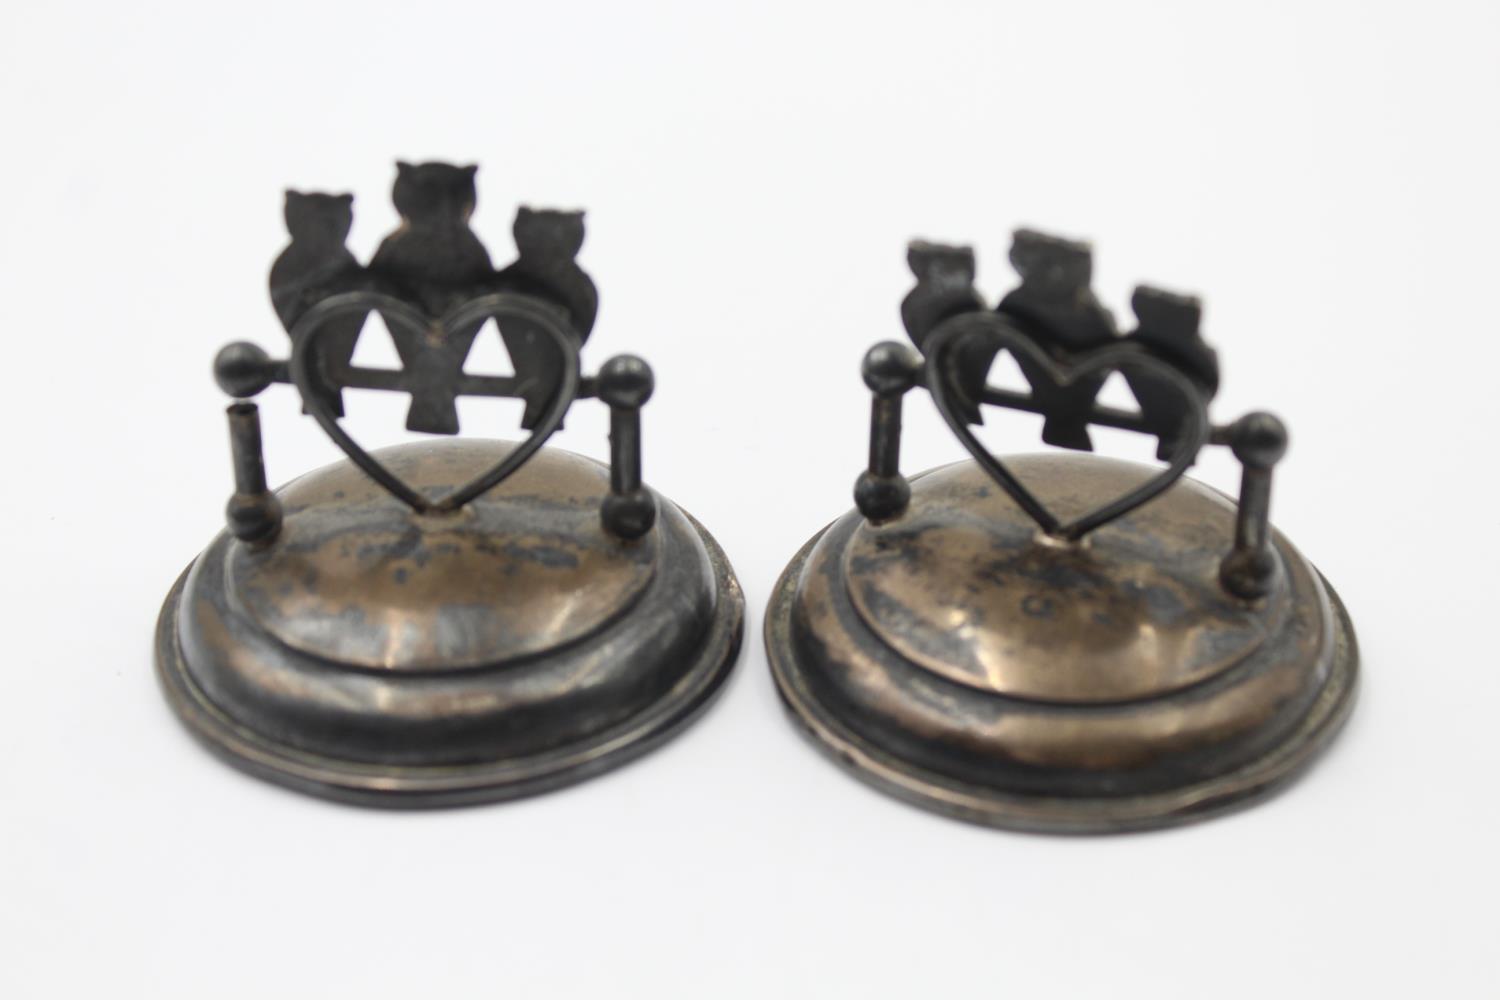 2 x Antique Hallmarked 1912 Birmingham STERLING SILVER Place Card Holders (97g) Maker - William Vale - Image 5 of 6